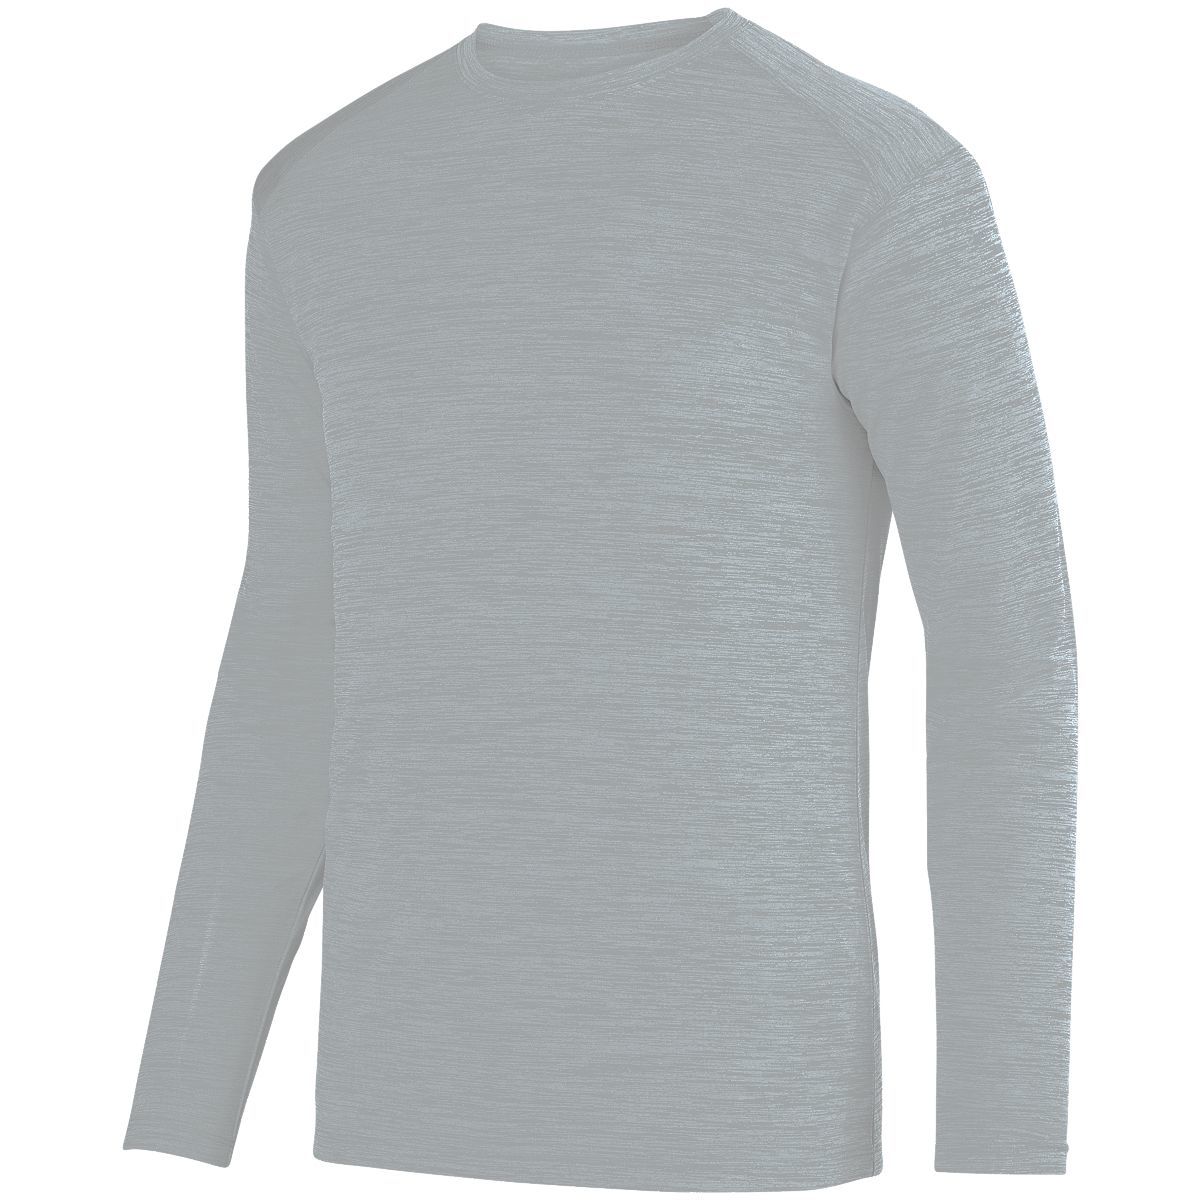 Augusta Sportswear Shadow Tonal Heather Long Sleeve Tee in Silver  -Part of the Adult, Adult-Tee-Shirt, T-Shirts, Augusta-Products, Shirts, Tonal-Fleece-Collection product lines at KanaleyCreations.com